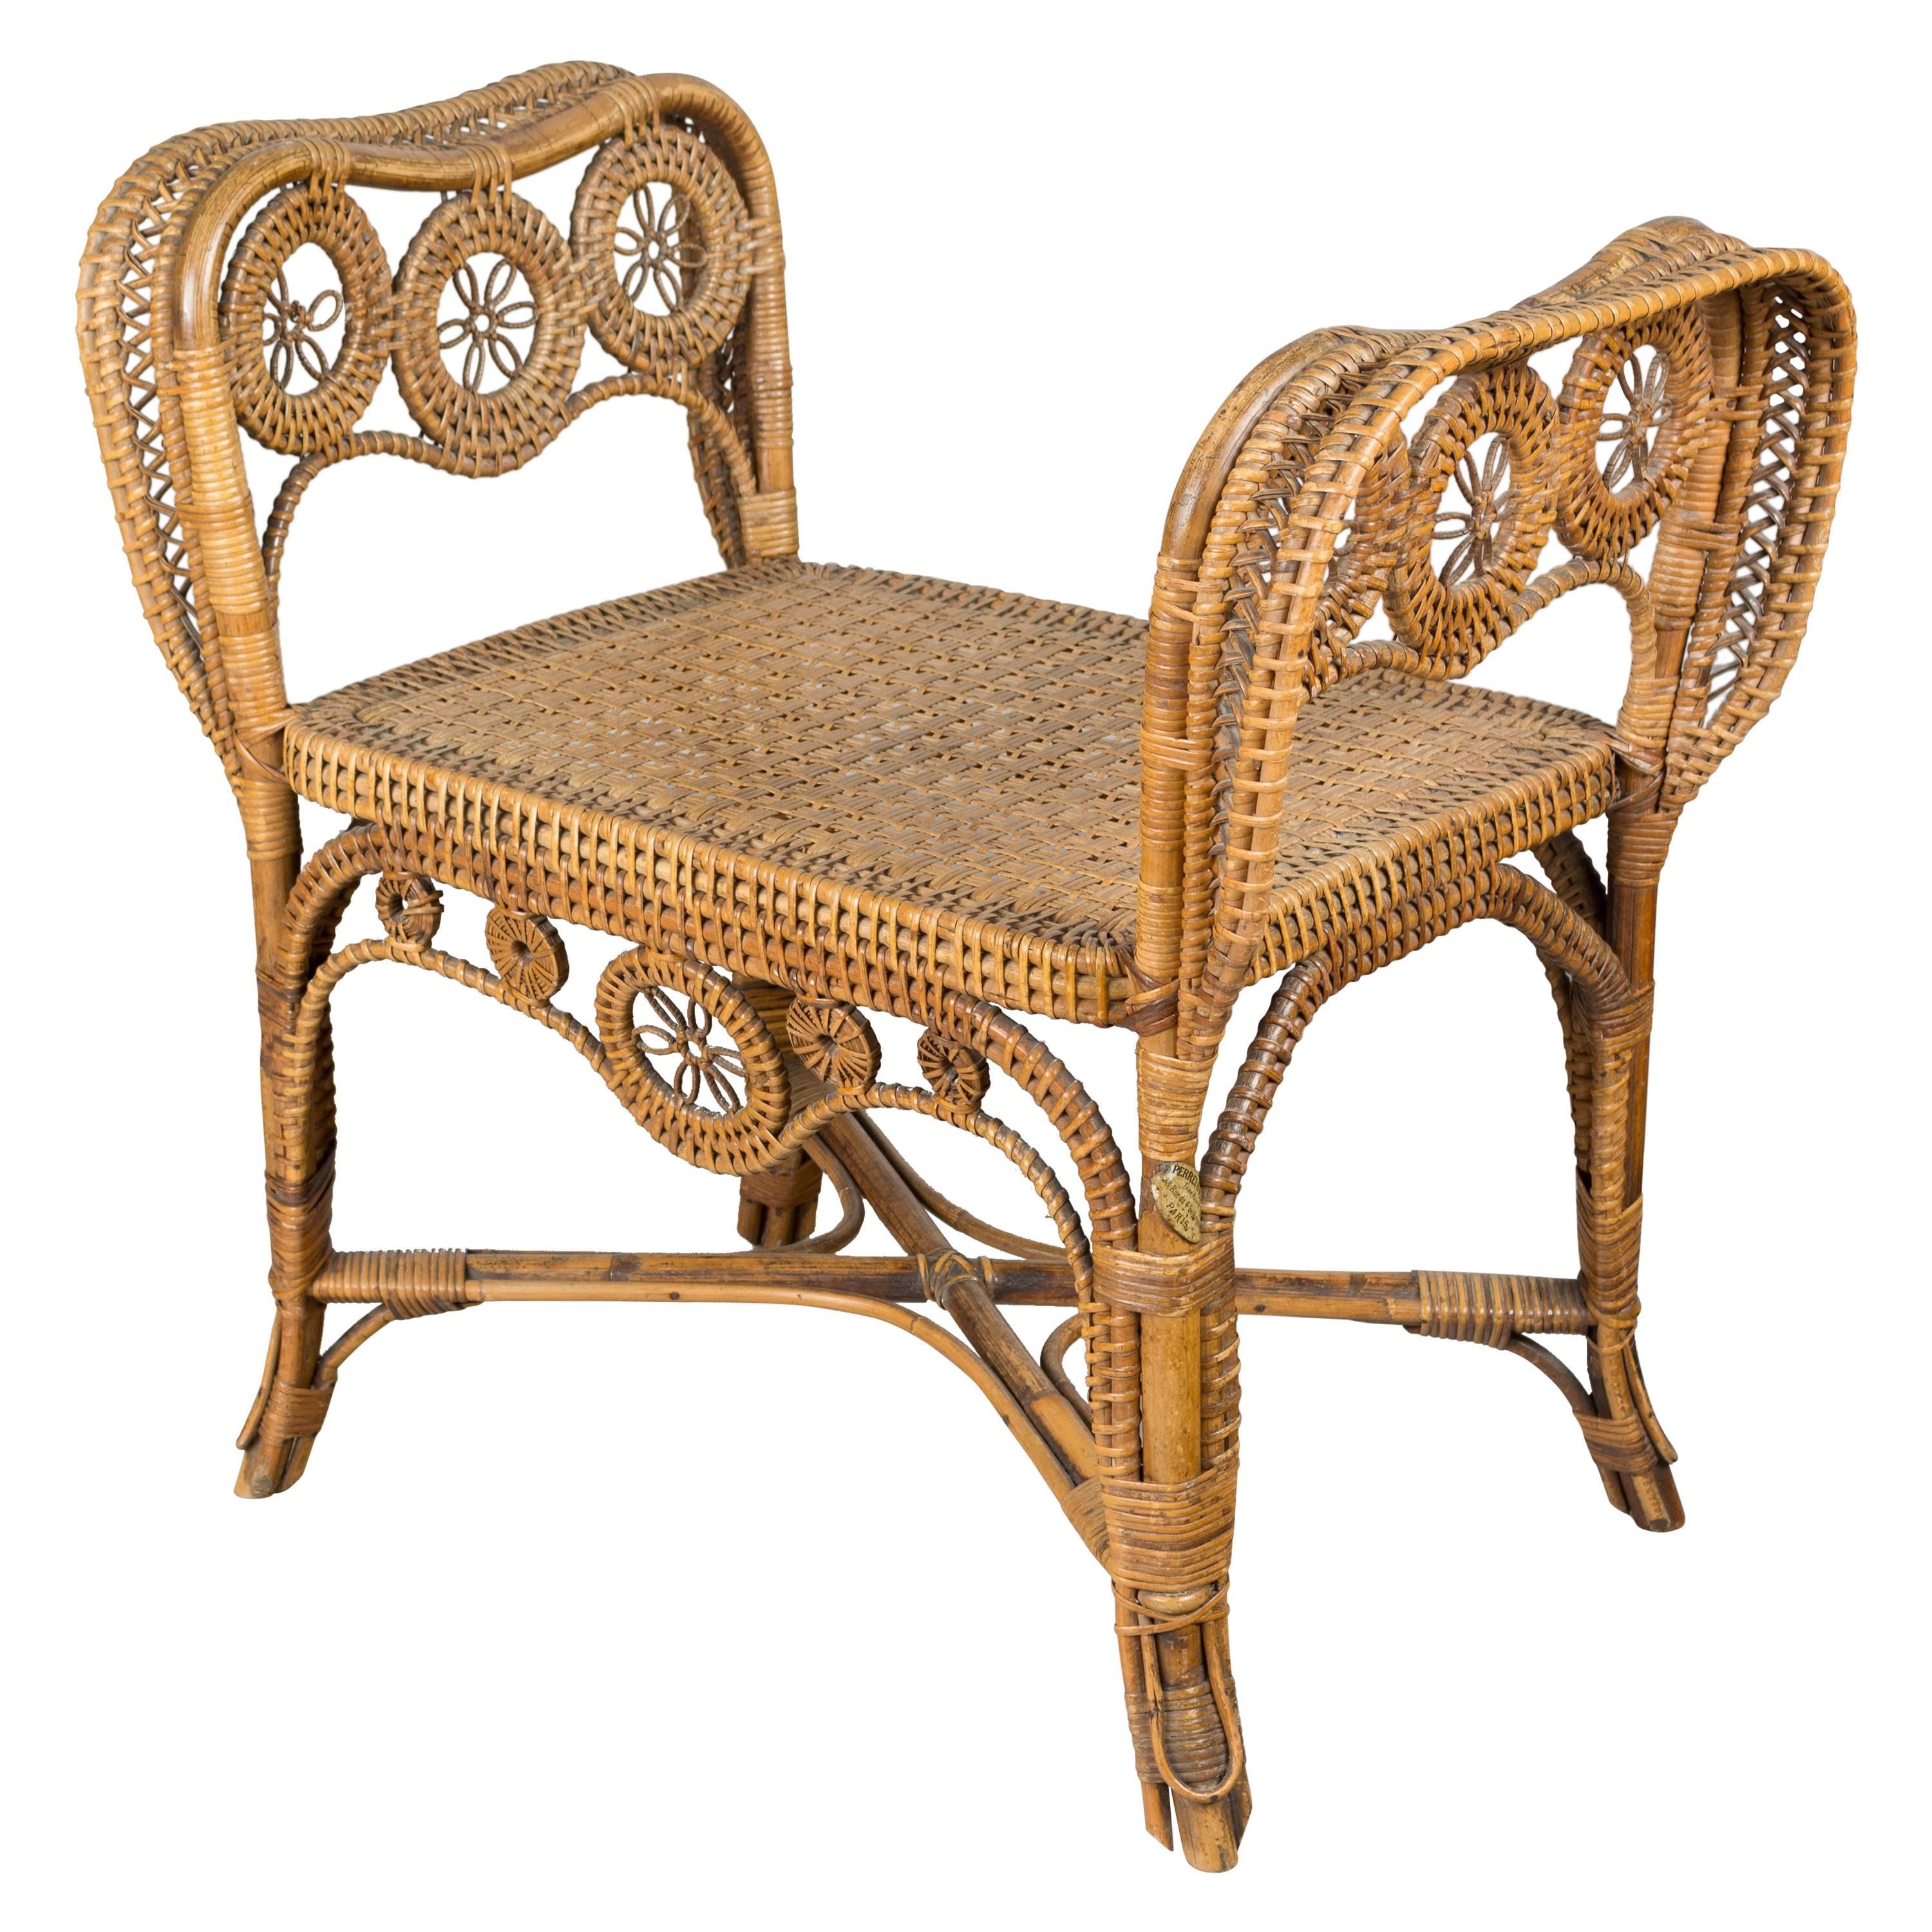 19th Century, French Wicker Bench by Perret & Vibert